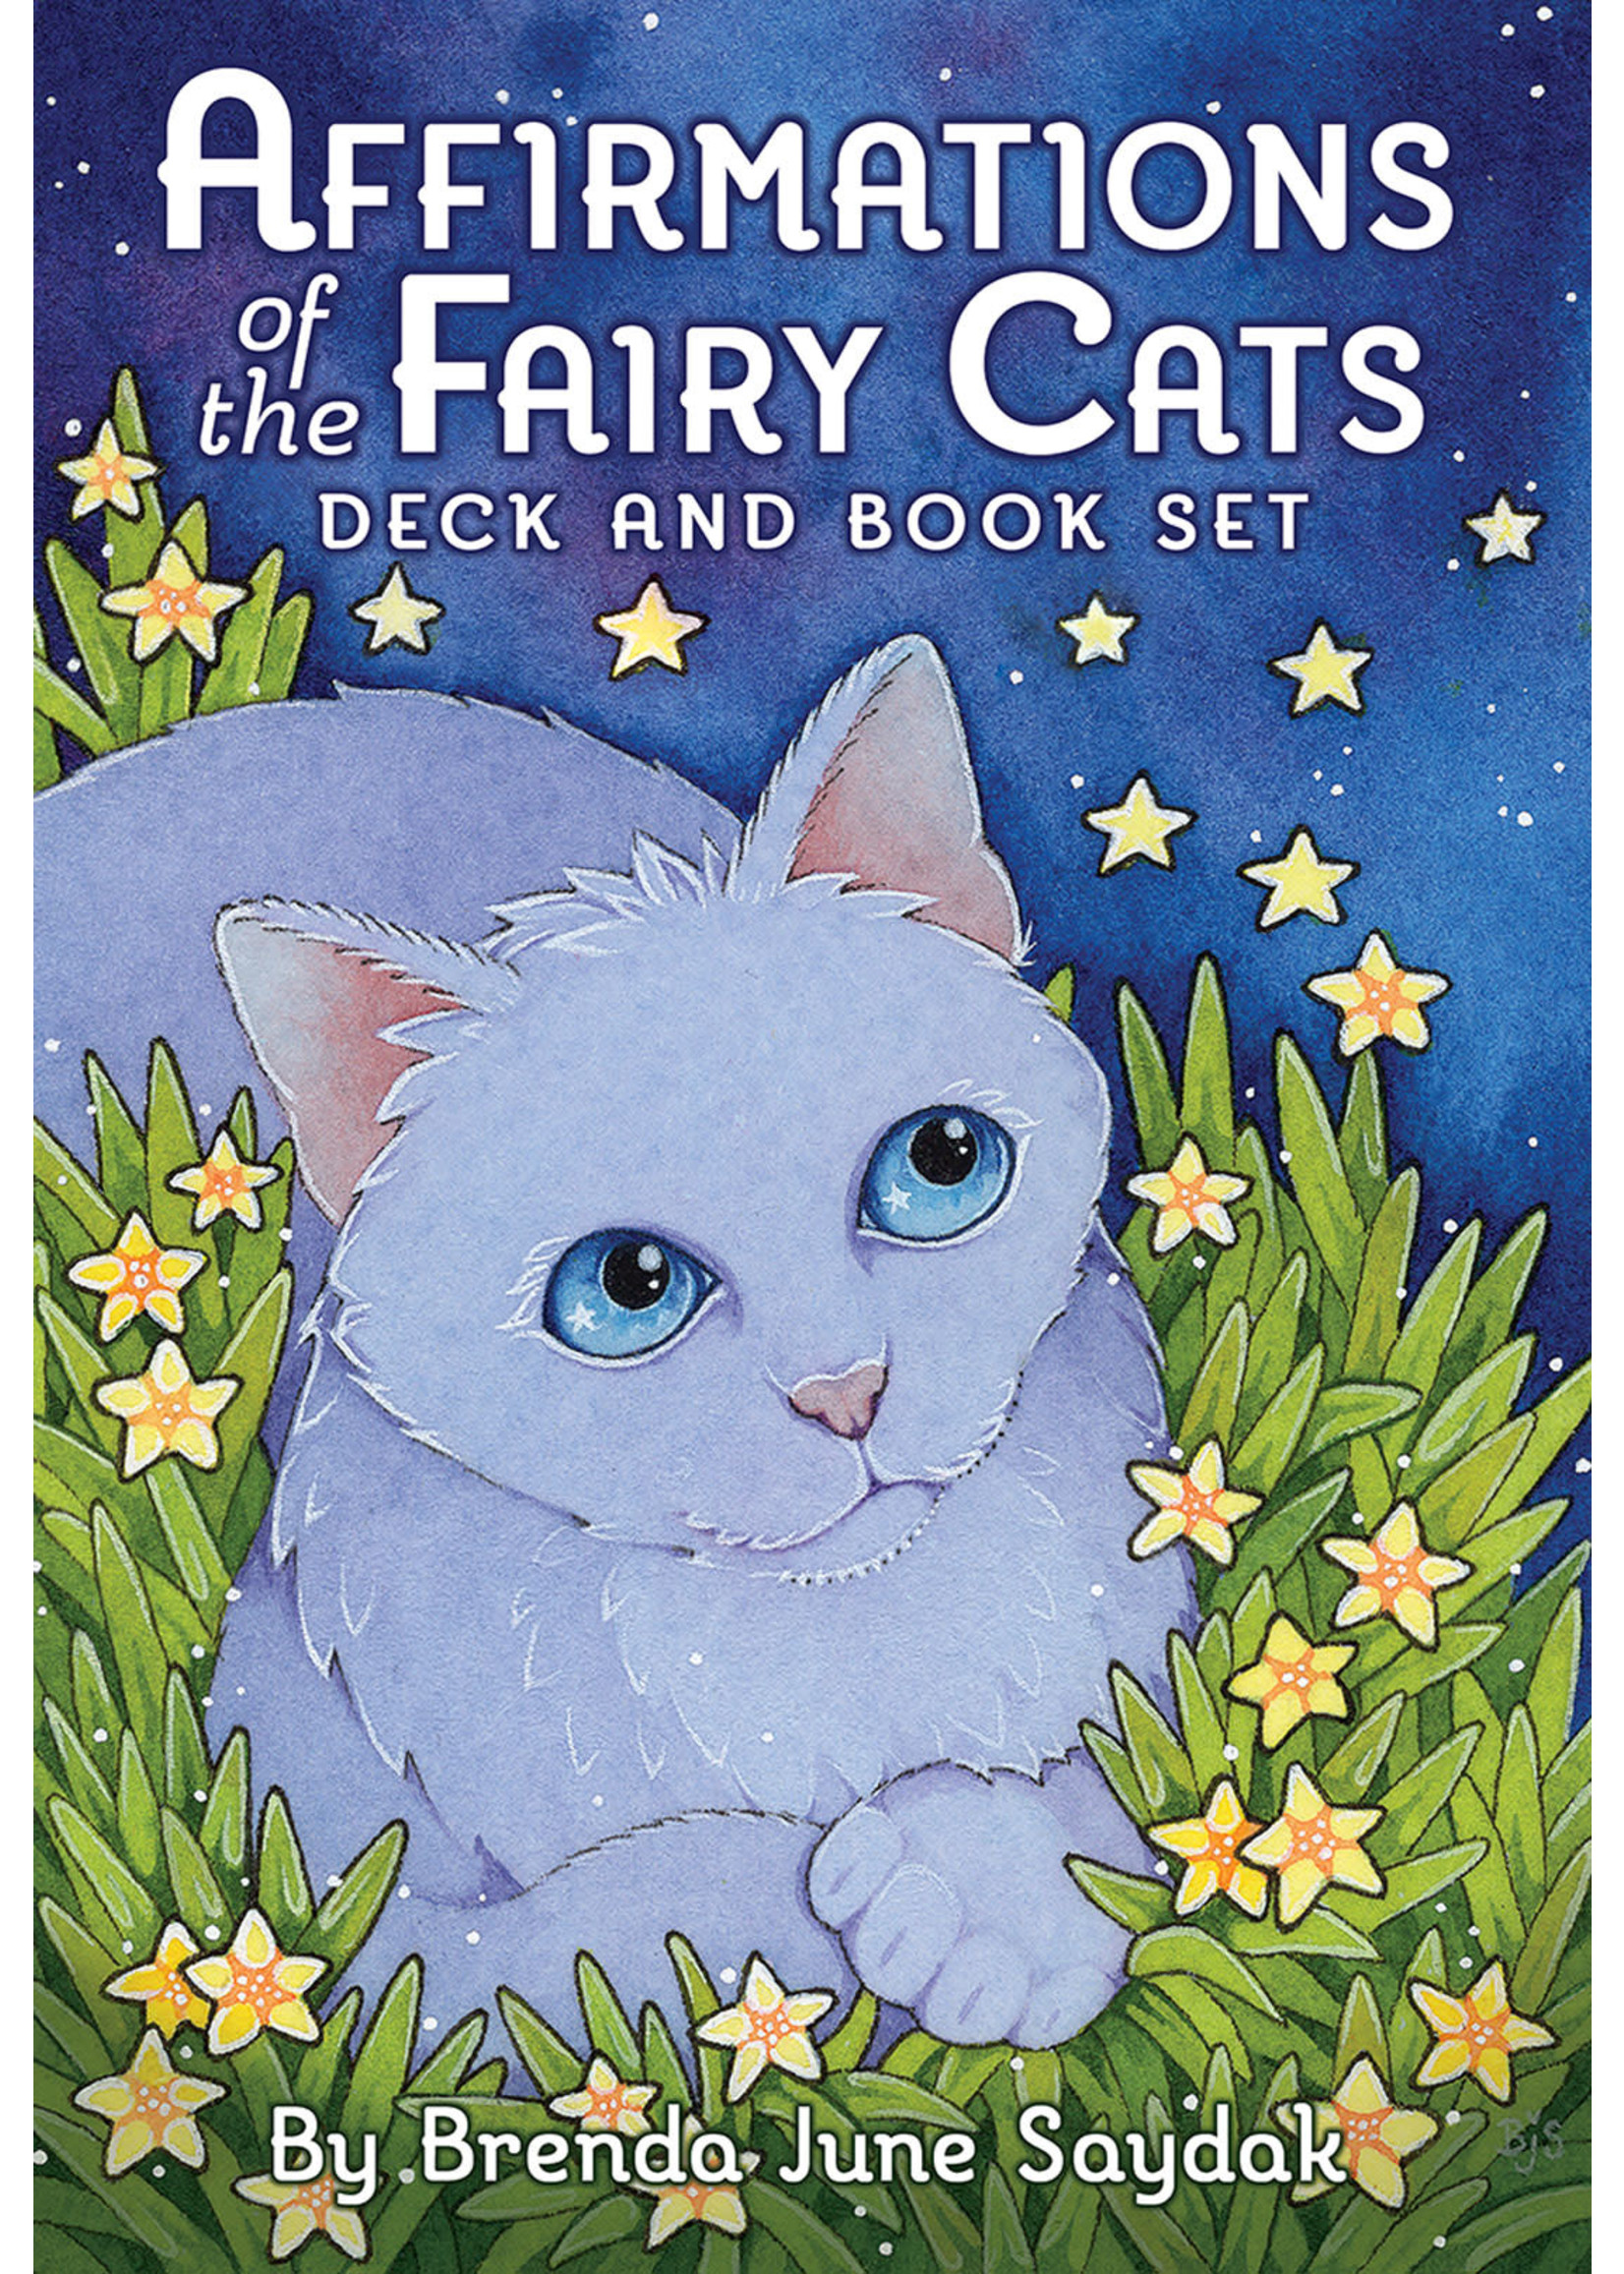 Deck Affirmations of the Fairy Cats